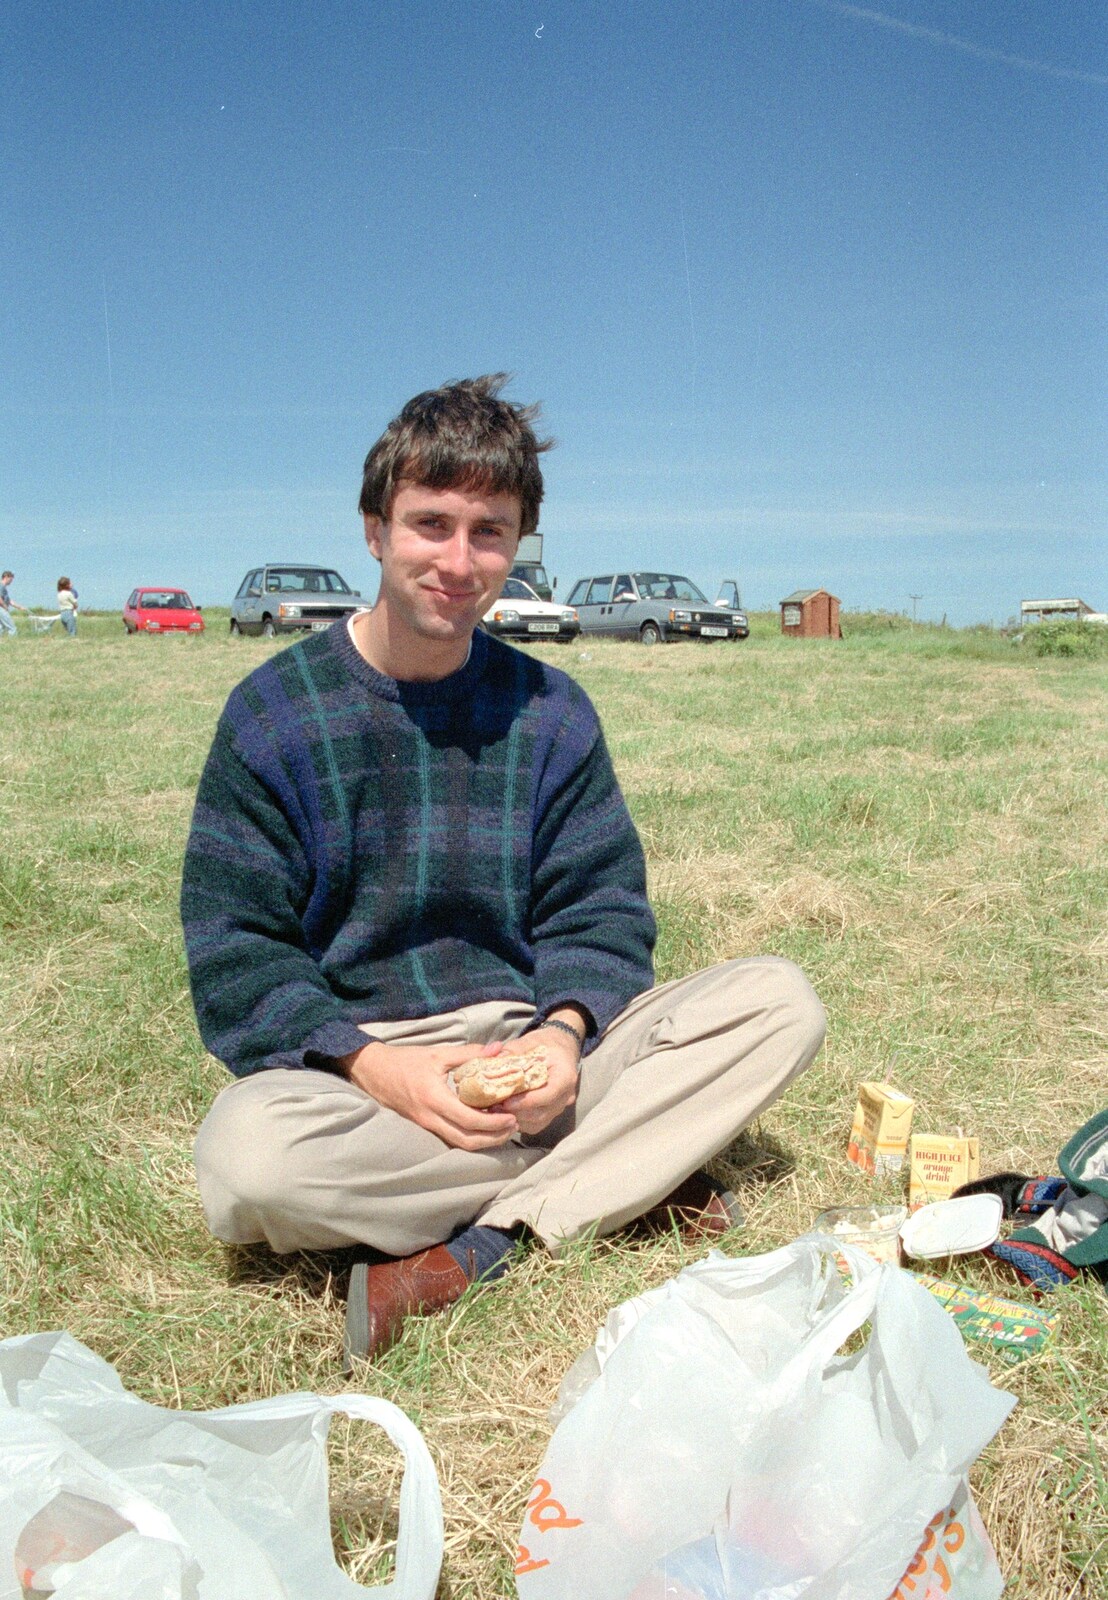 Riki with a sandwich from Uni: An End-of-it-all Trip to Land's End, Cornwall - 13th June 1989